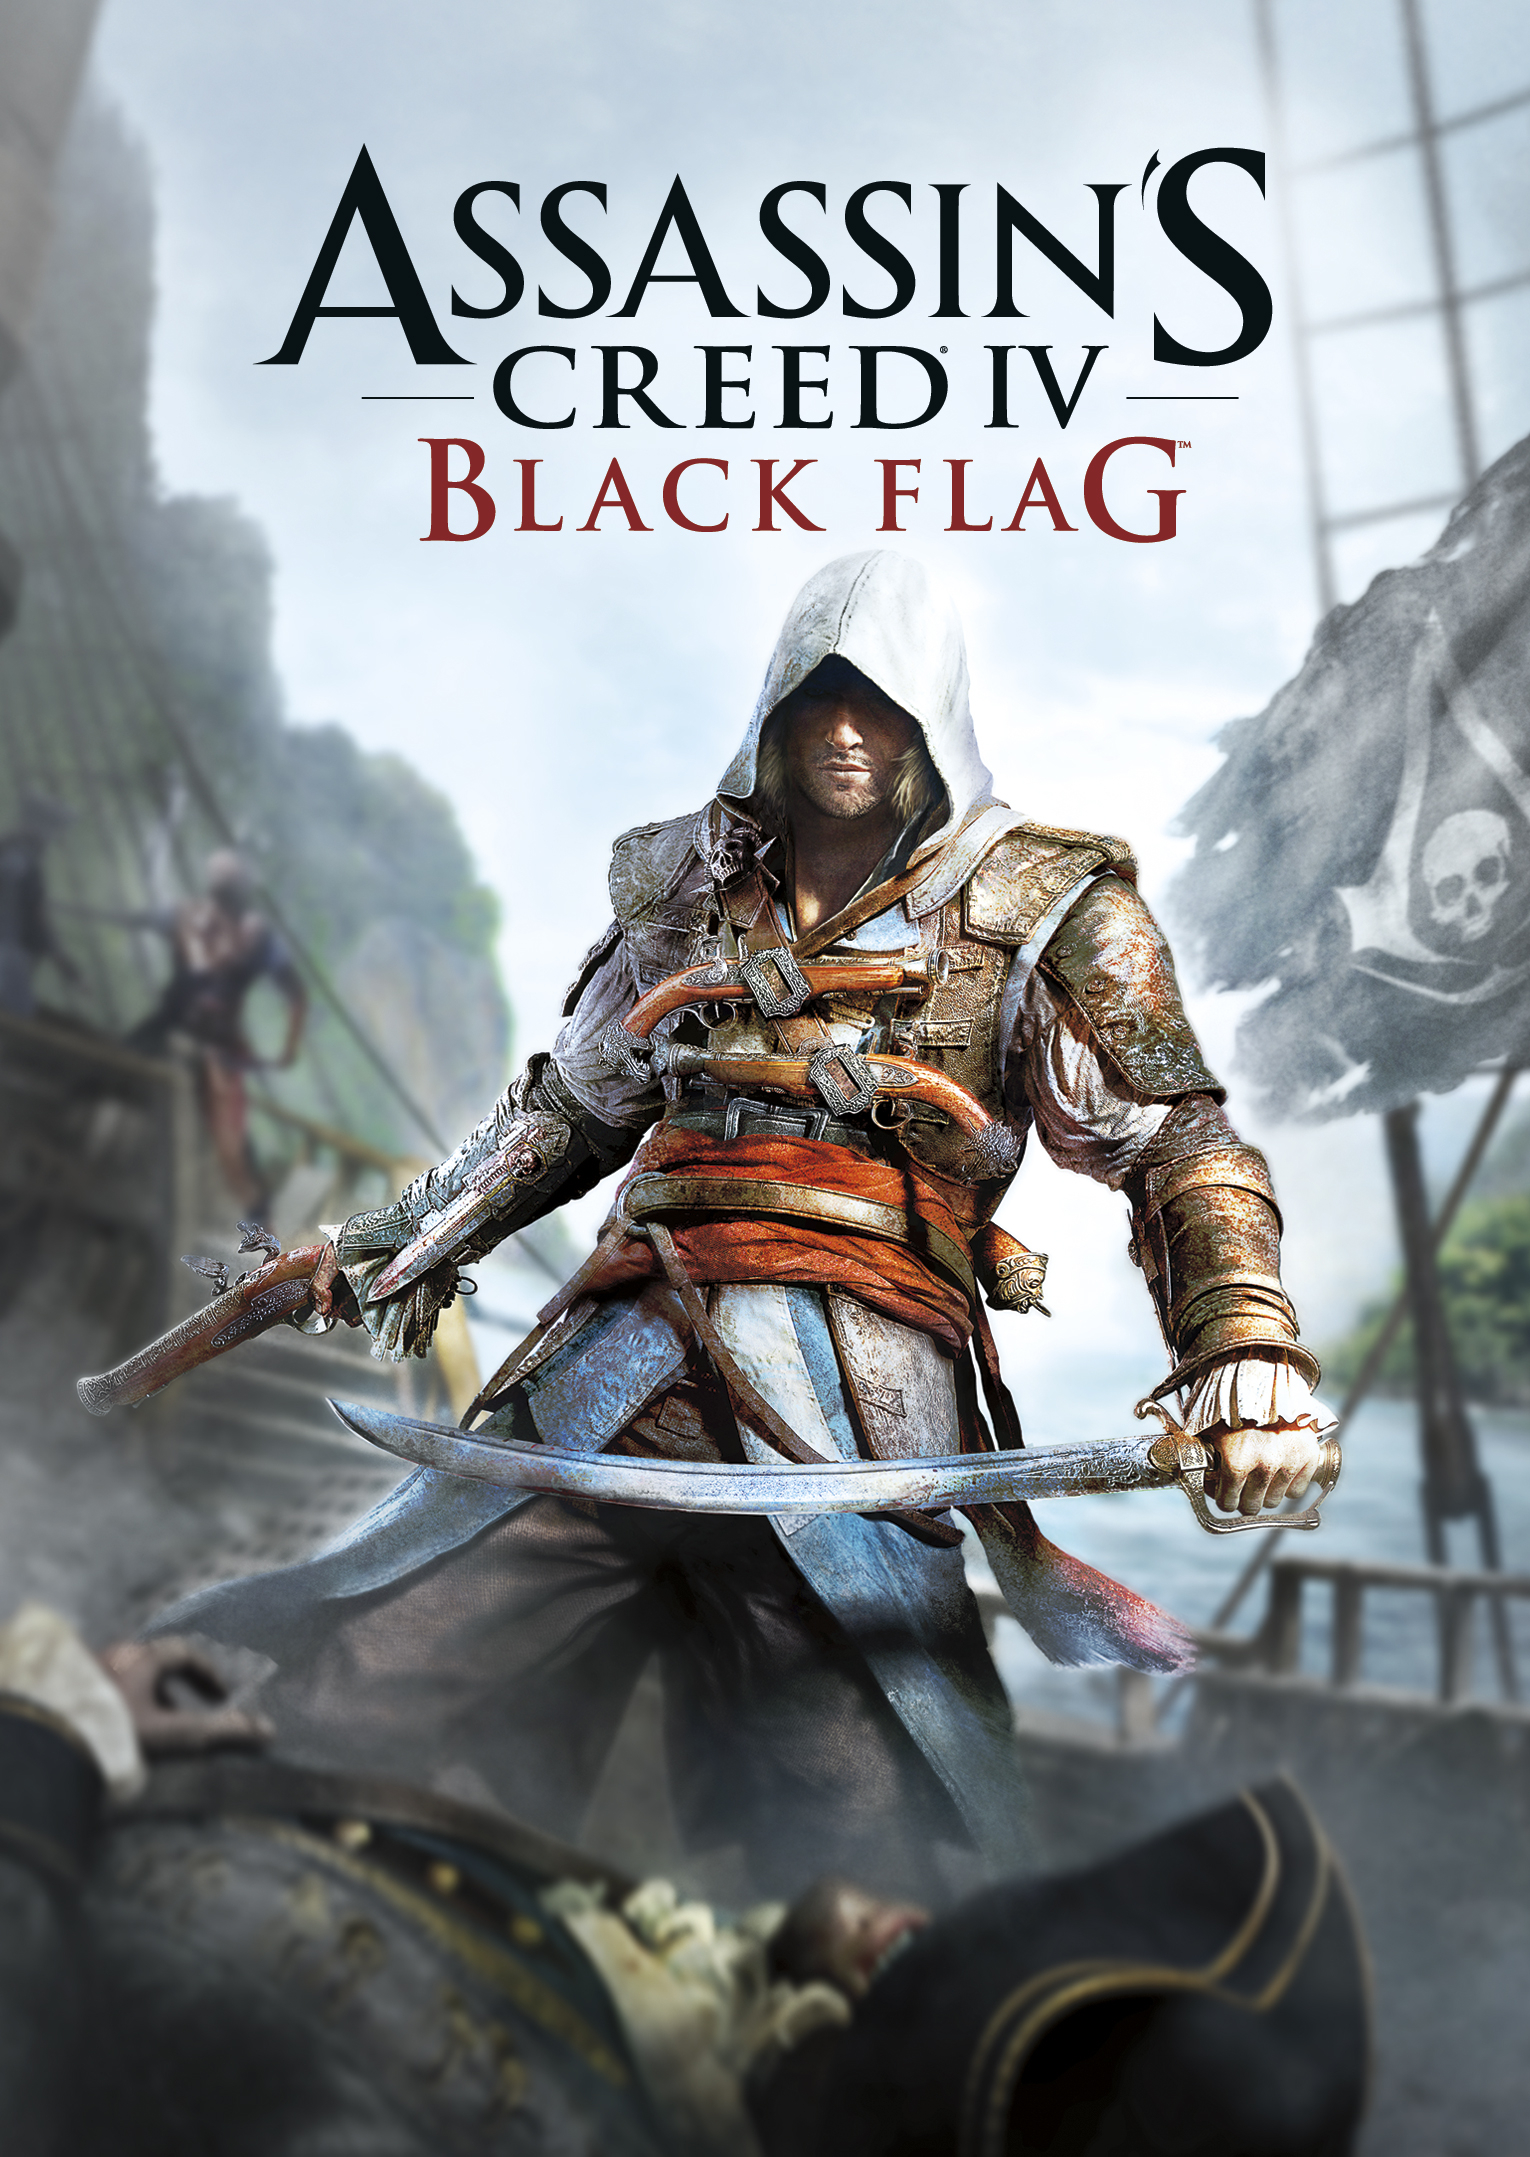 Assassin's Creed (2007 Game), Gaming Database Wiki